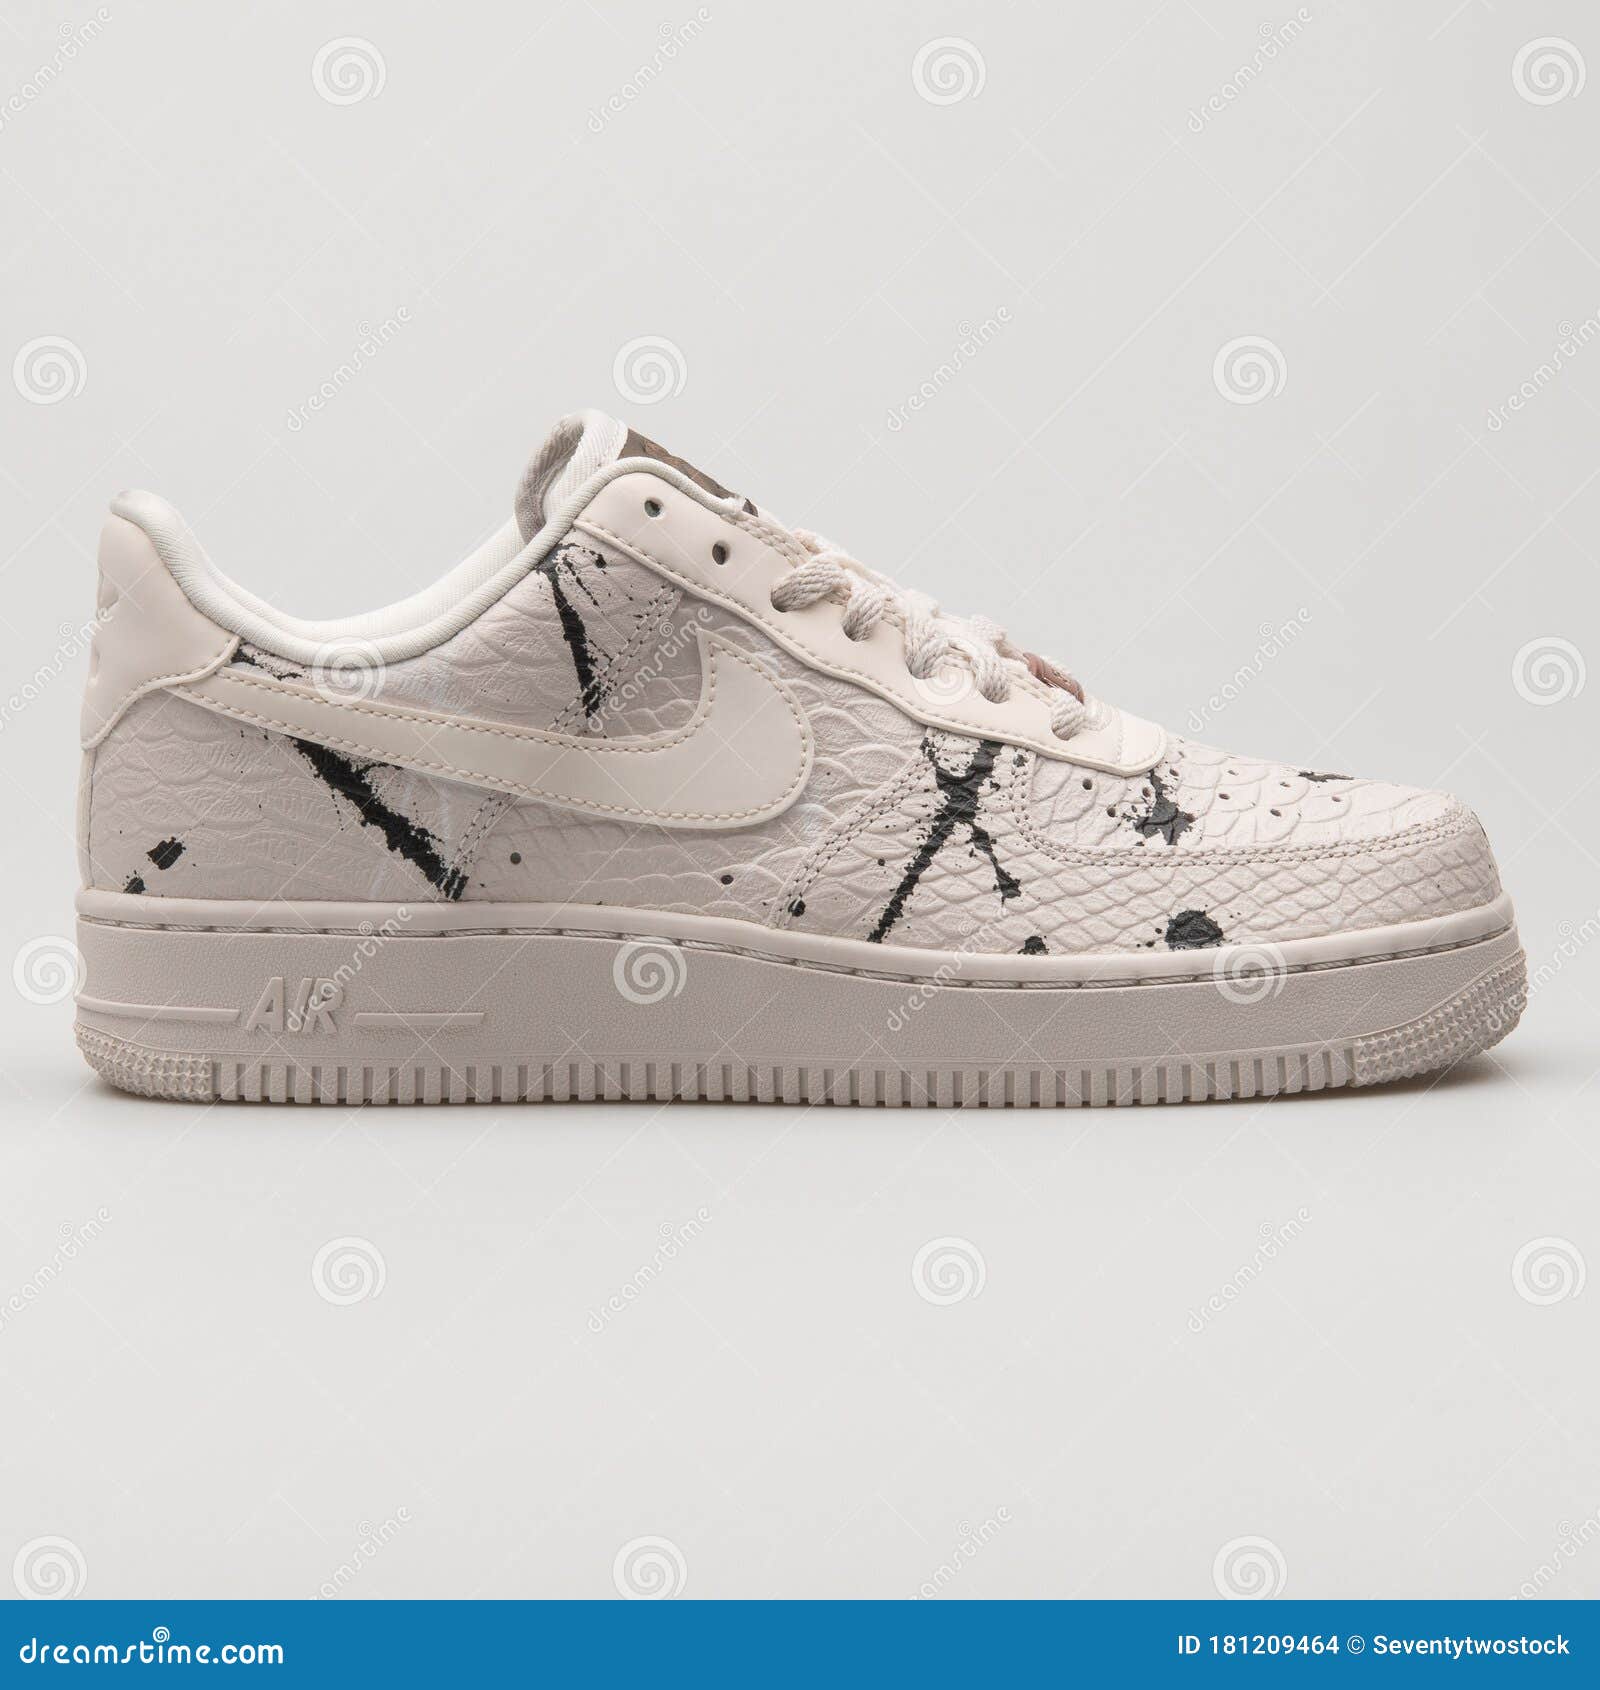 white shoe paint for air forces